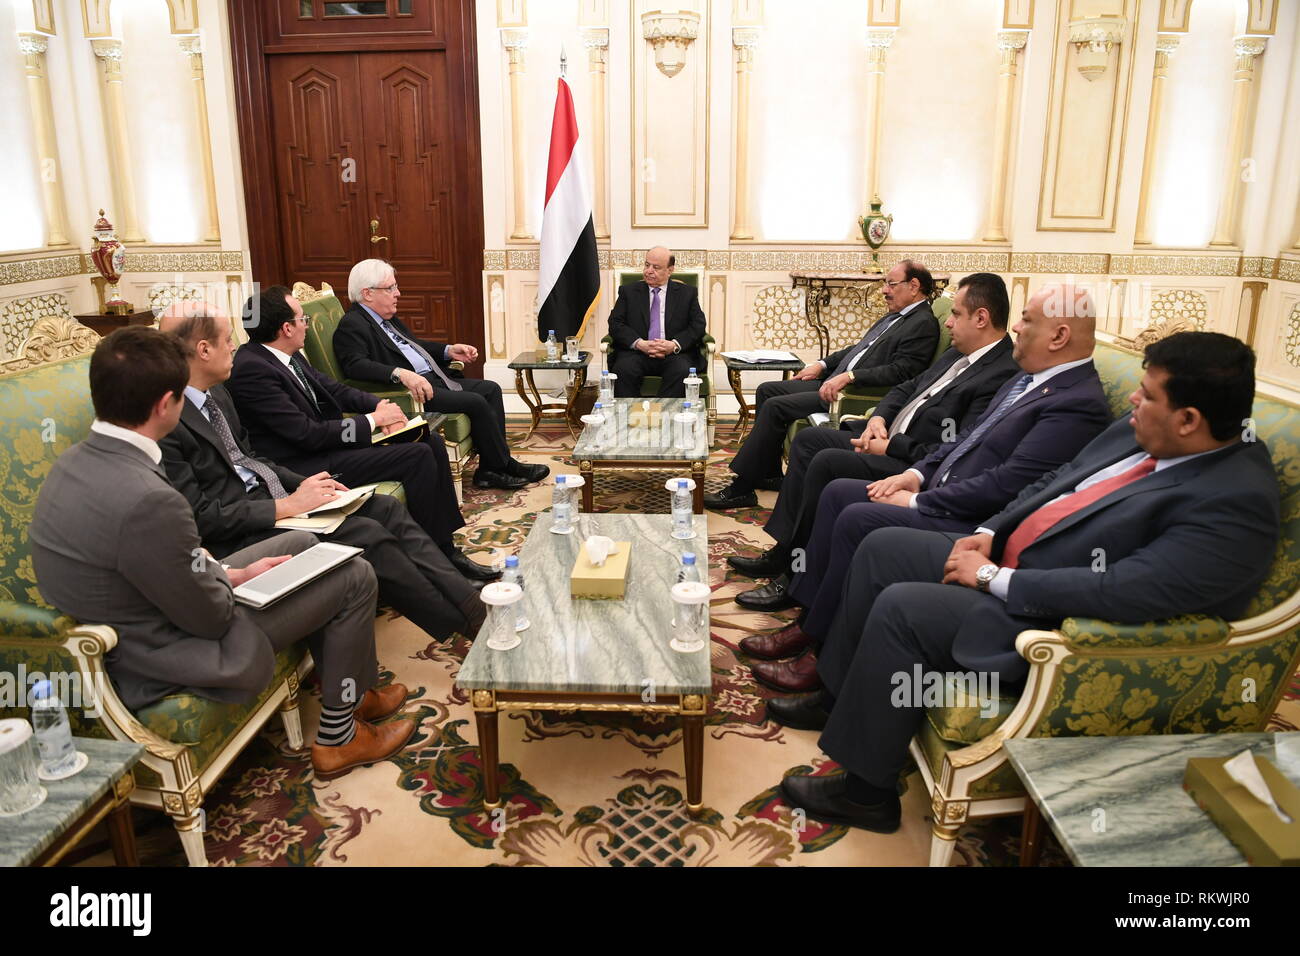 (190212) -- RIYADH, Feb. 12, 2019 (Xinhua) -- Yemen's internationally-backed President Abdu-Rabbu Mansour Hadi (C) meets with the UN special envoy Martin Griffiths (4th L) in Saudi Arabia's capital of Riyadh, on Feb. 12, 2019. Hadi on Tuesday met with Griffiths, emphasizing the importance of fully implementing the Sweden Agreement. (Xinhua) Stock Photo